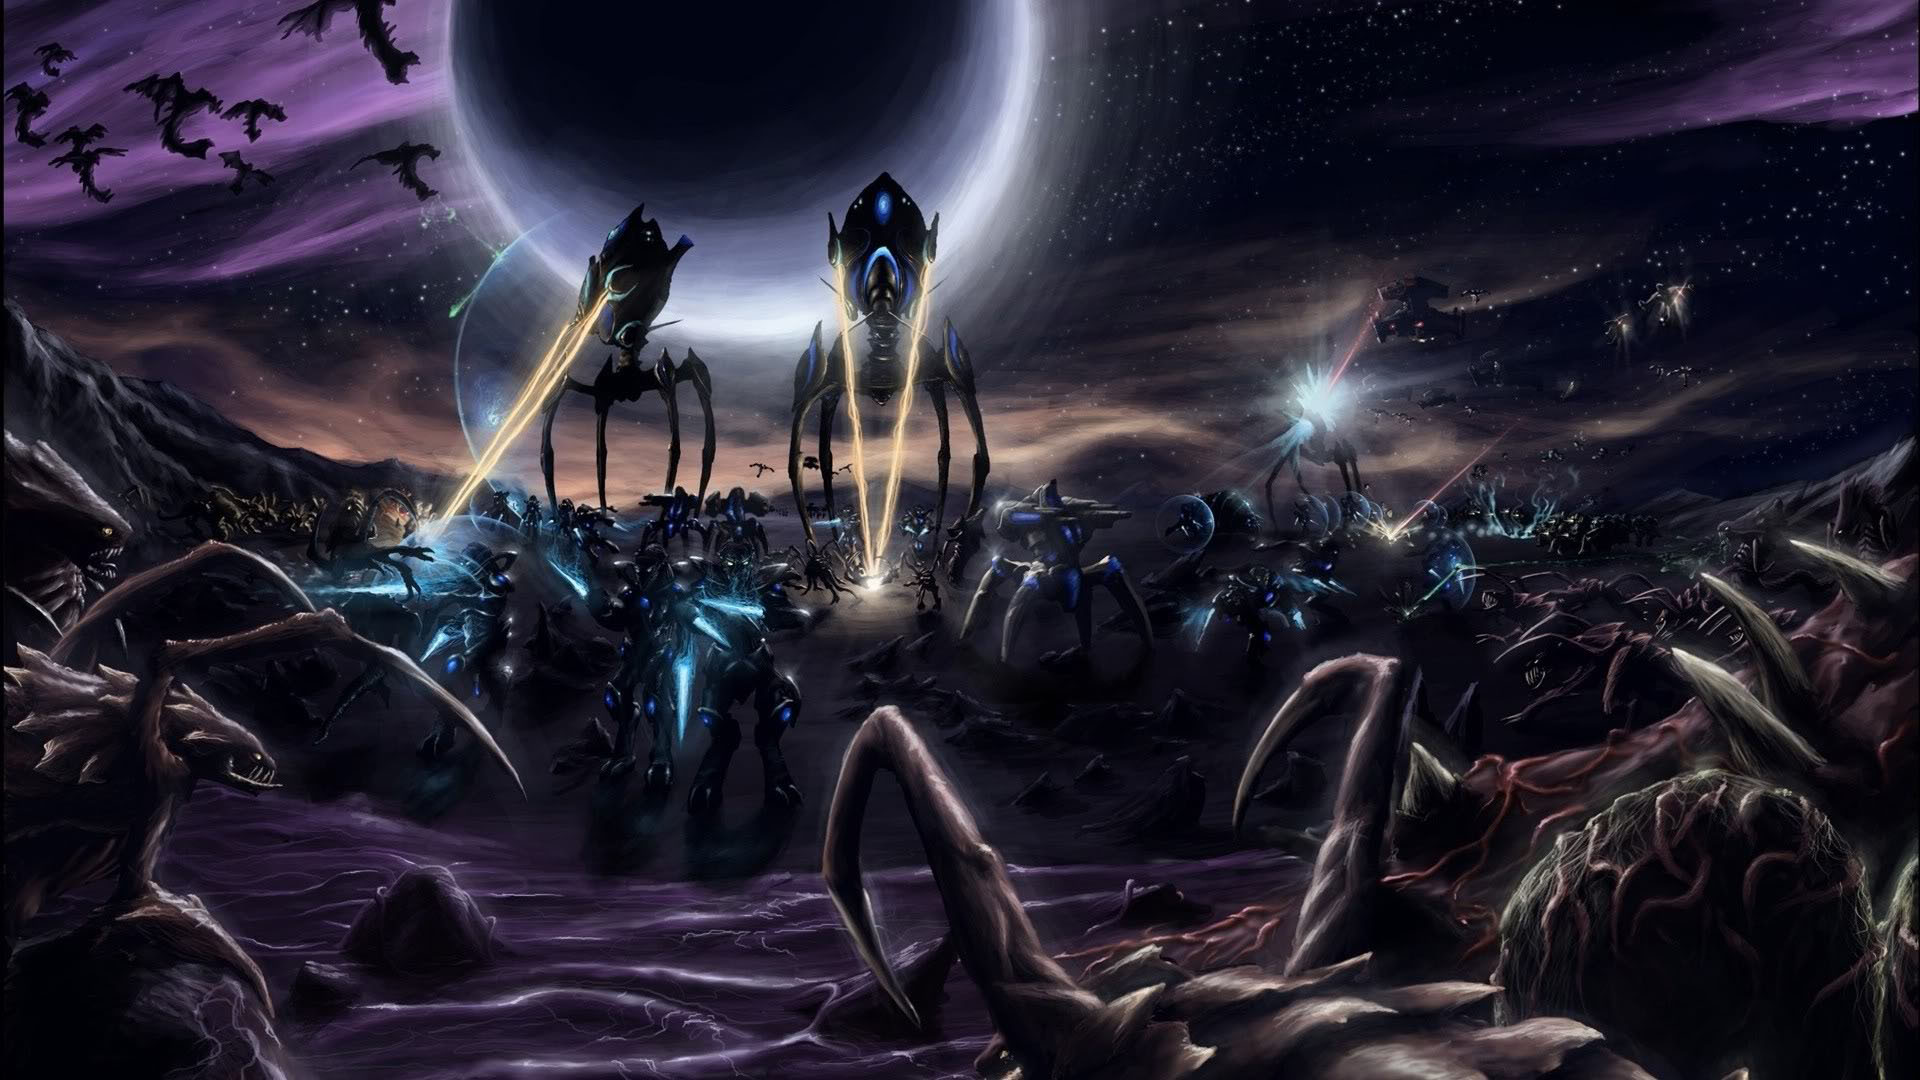 The Zerg Swarm Action Rpg Games Wallpaper Image Featuring Starcraft